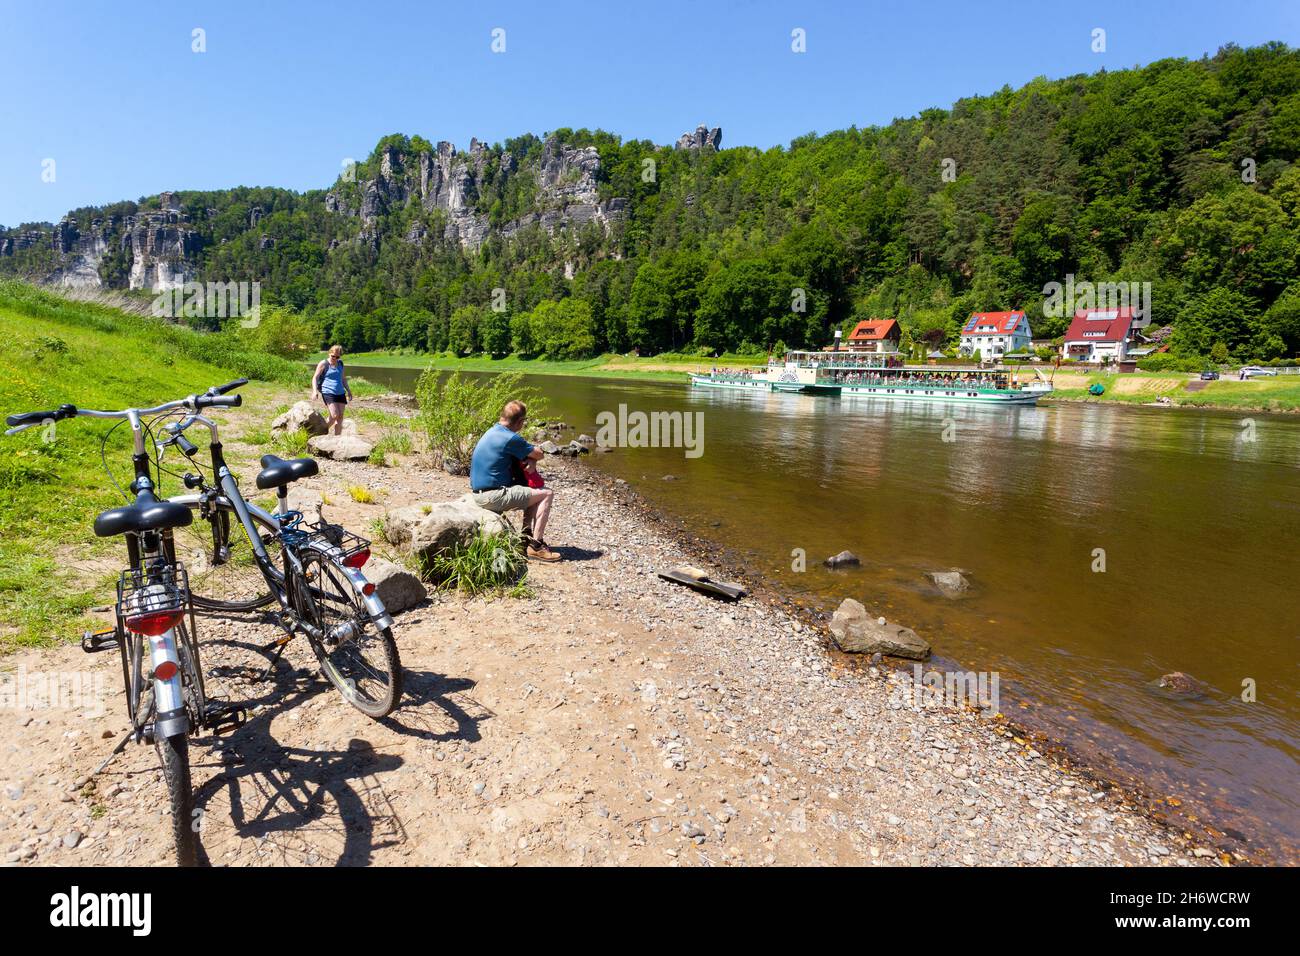 Elbe river scenic view Germany Elbe Valley in Saxon Switzerland People on shore watching passing boat and Sandstone cliffs Stock Photo